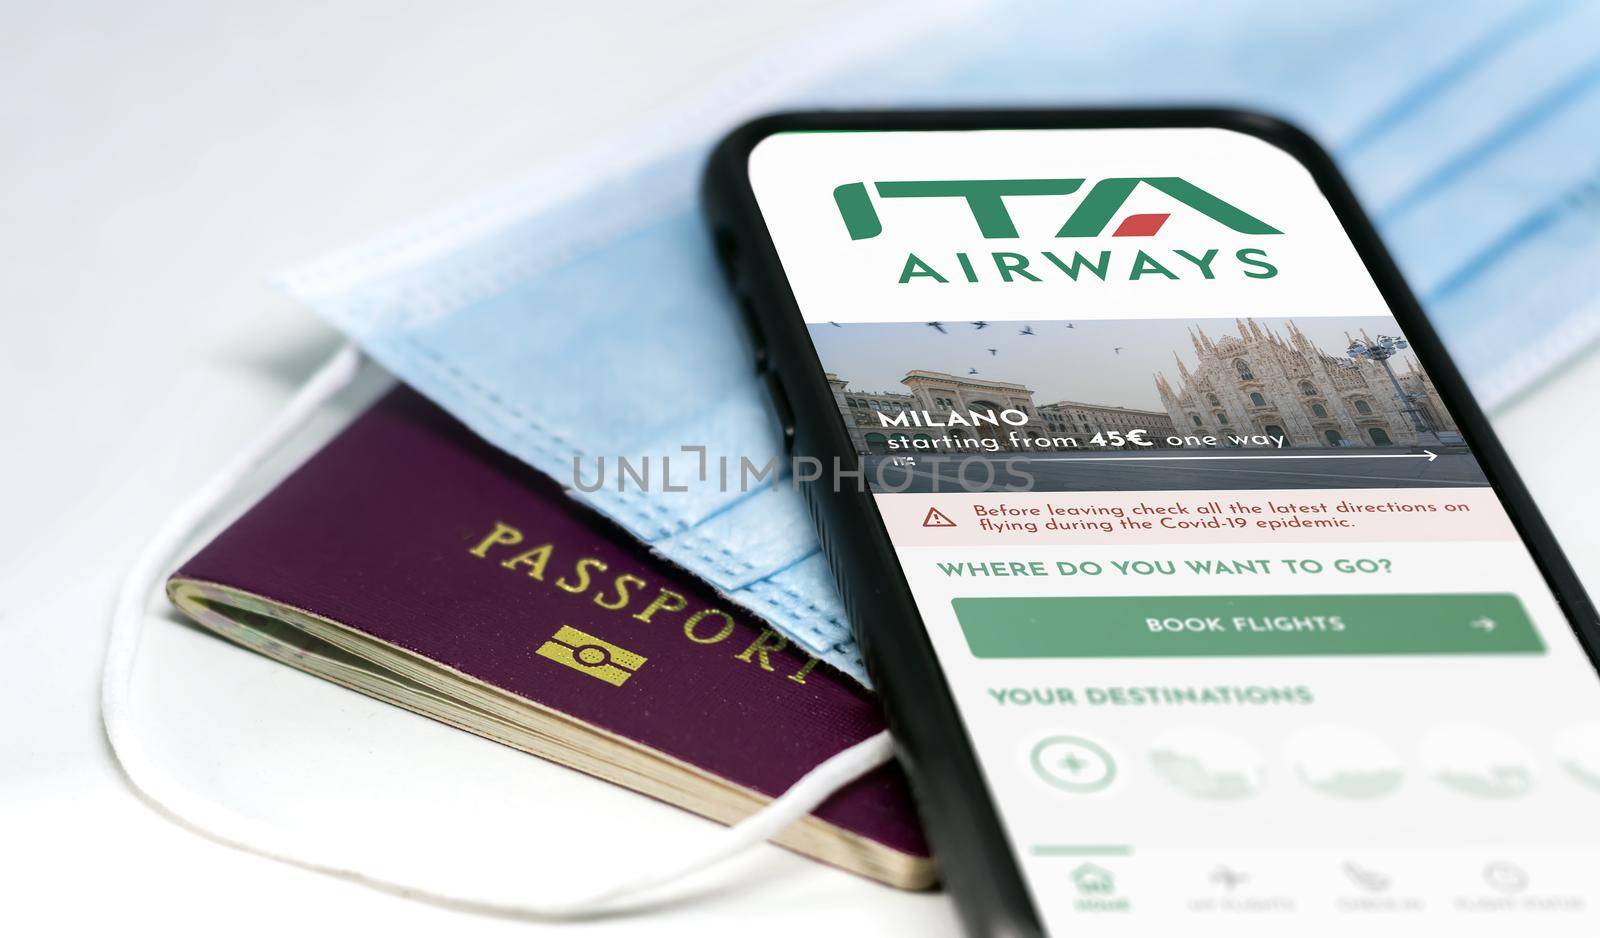 Rome, Italy, October 2021: phone with the ITA Airways app on the screen over a surgical mask and a passport. ITA Airways is the new Italian flag carrier starting from 15 October 2021. Travel safety